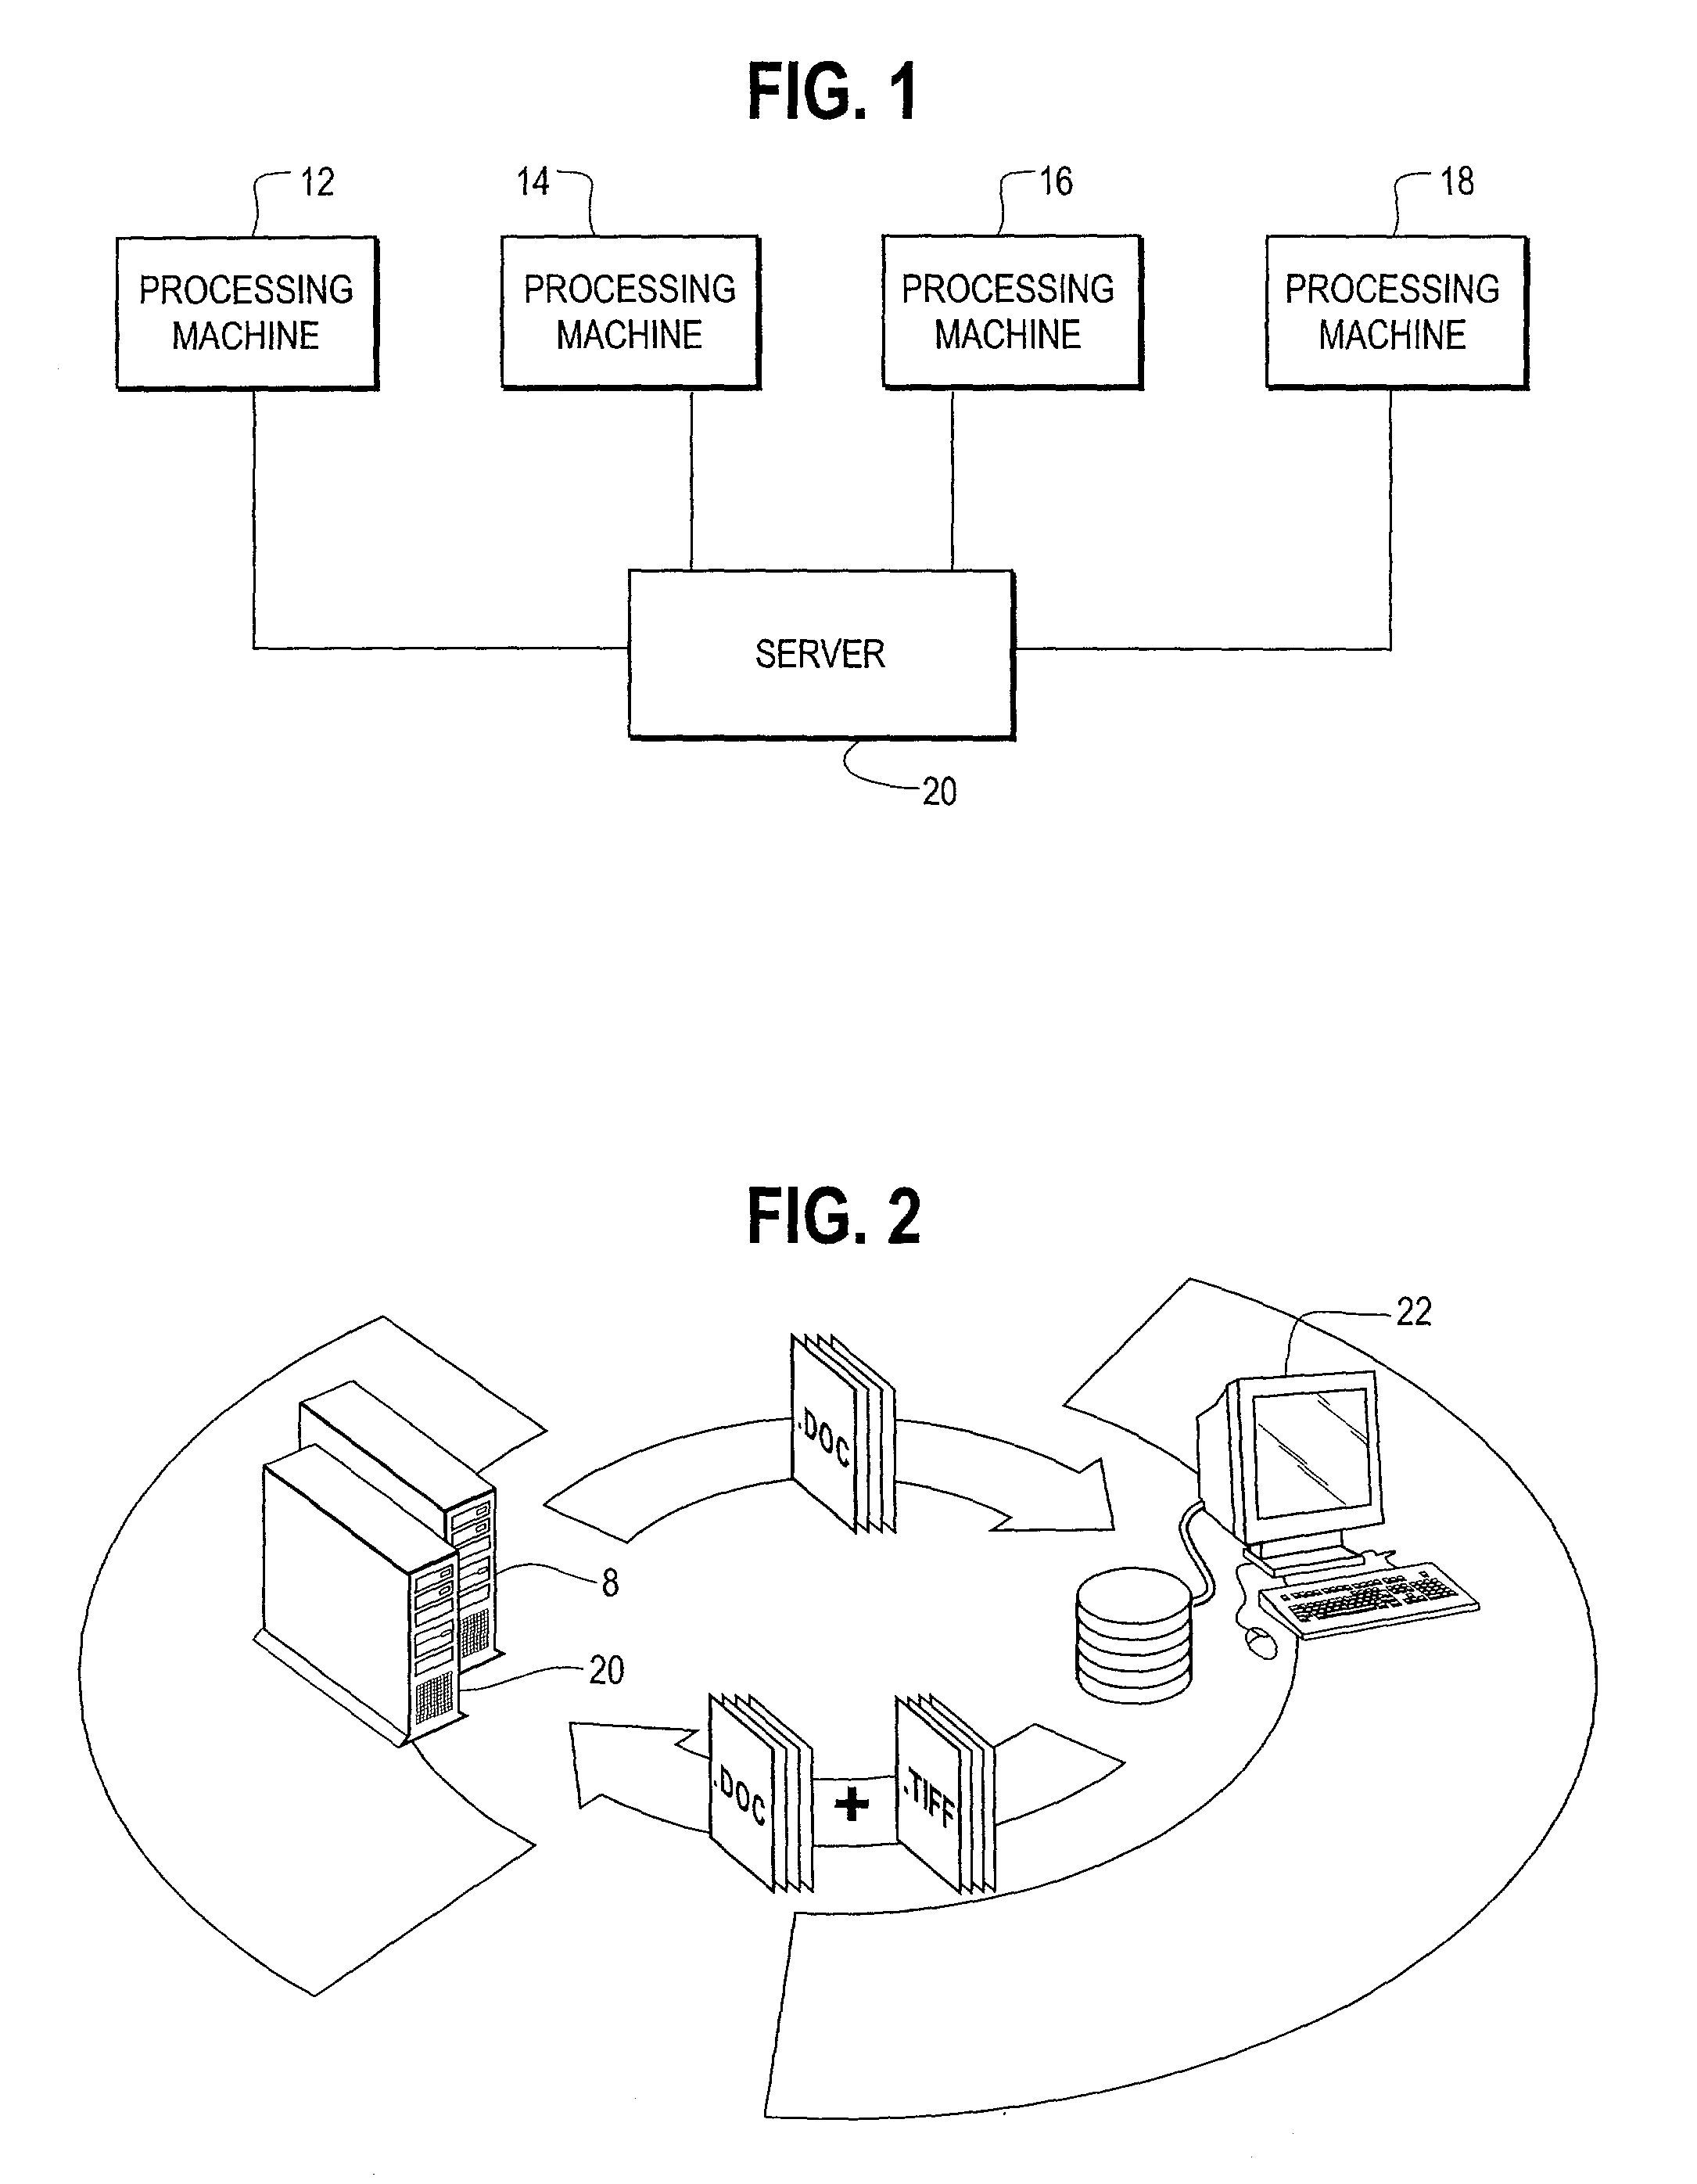 Systems and methods for automatically converting document file formats